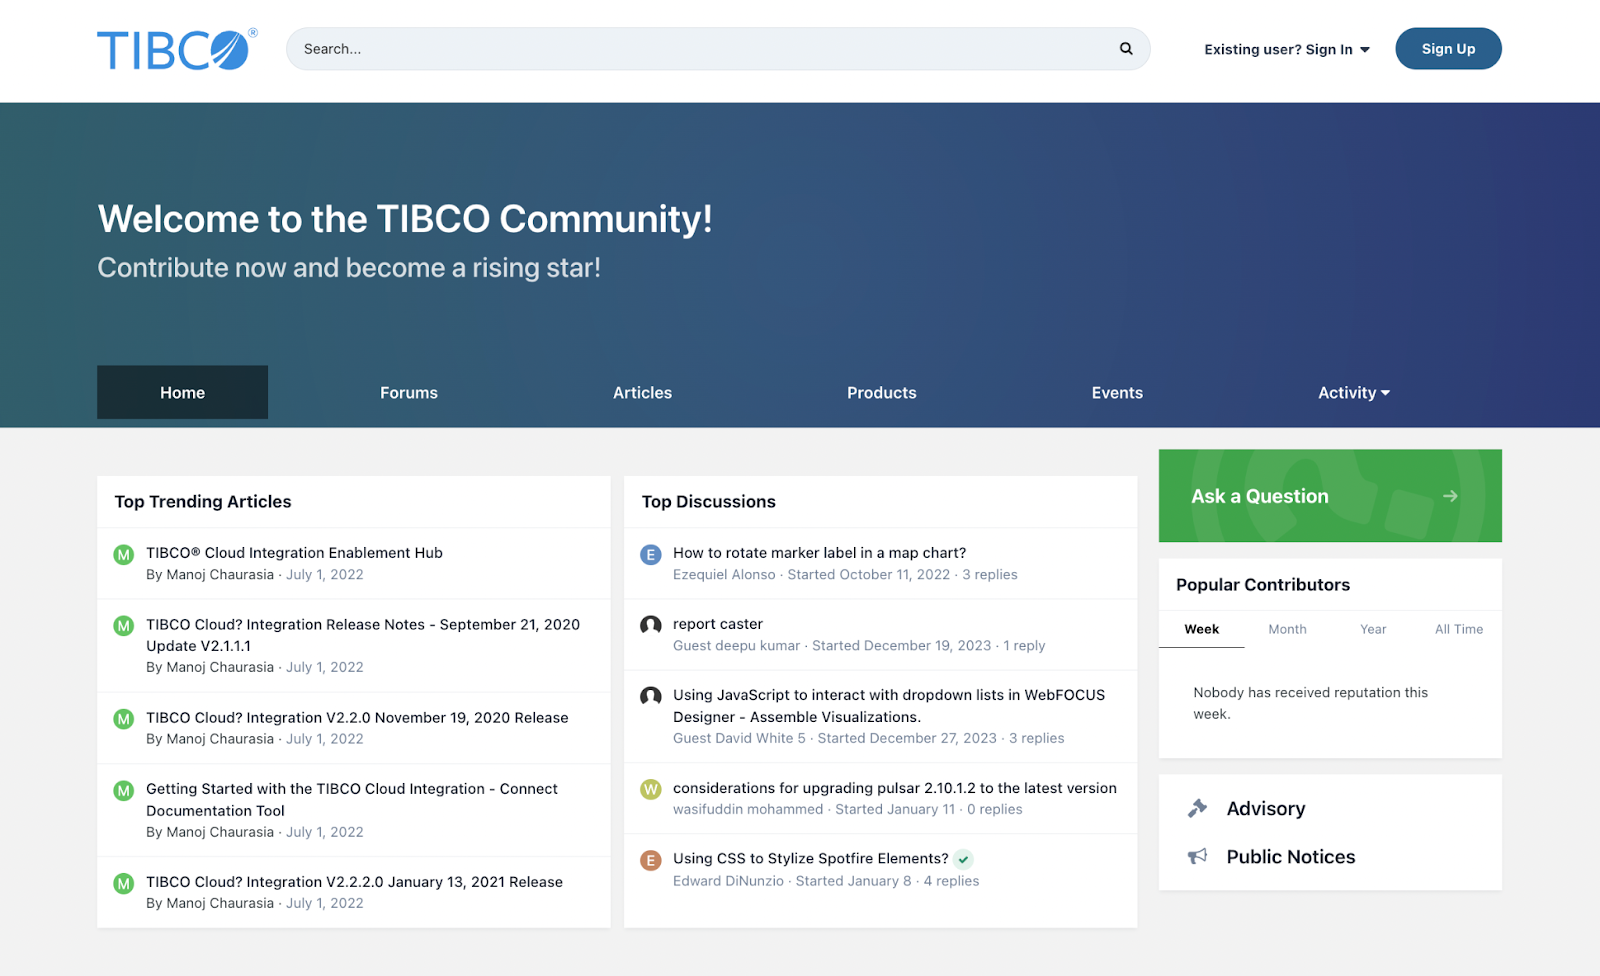 The homepage view of the new TIBCO Community site.